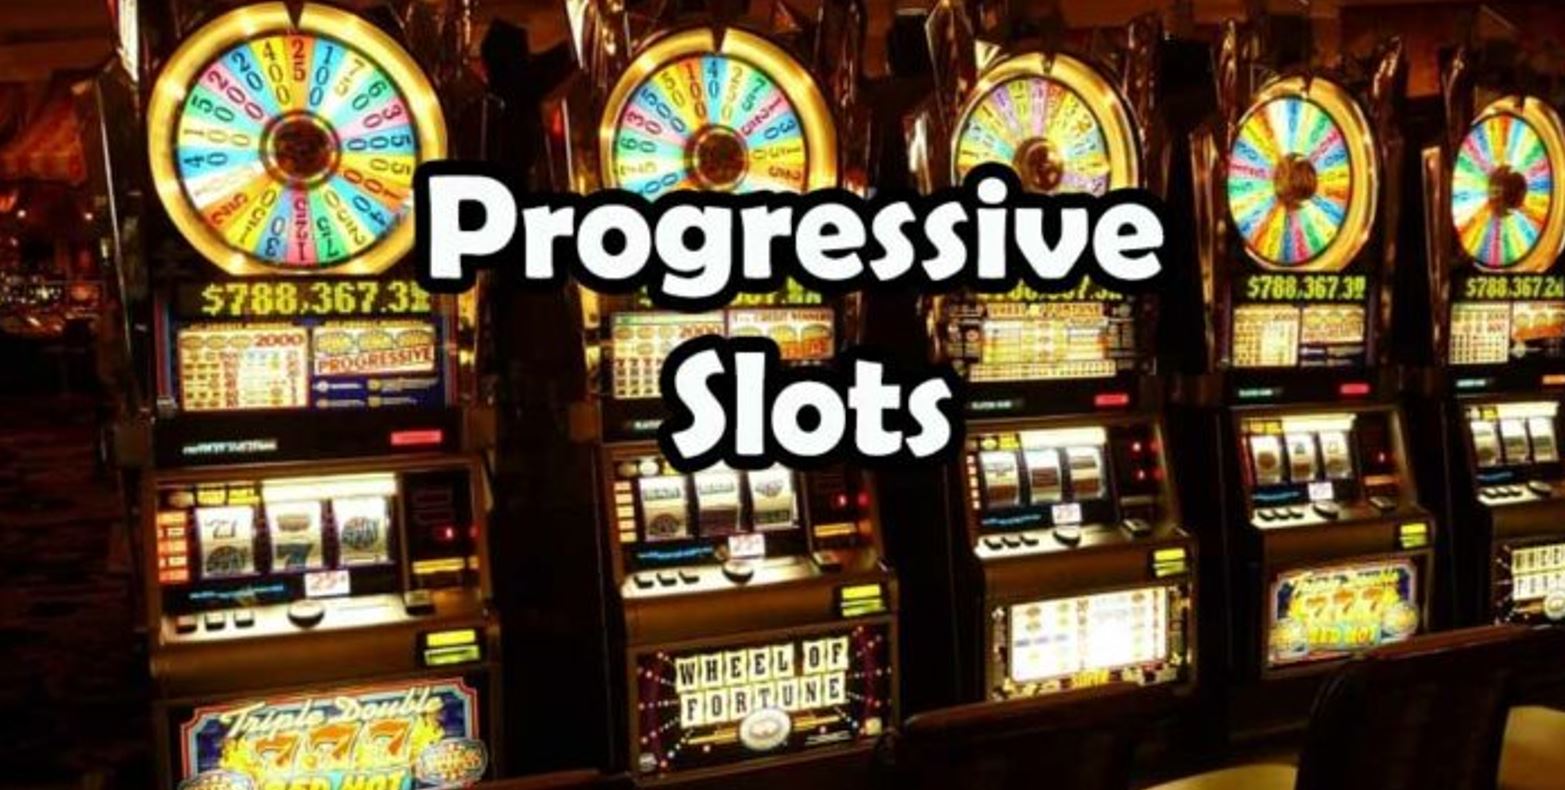 Progressive Slots - Great News For Any Gaming Enthusiast